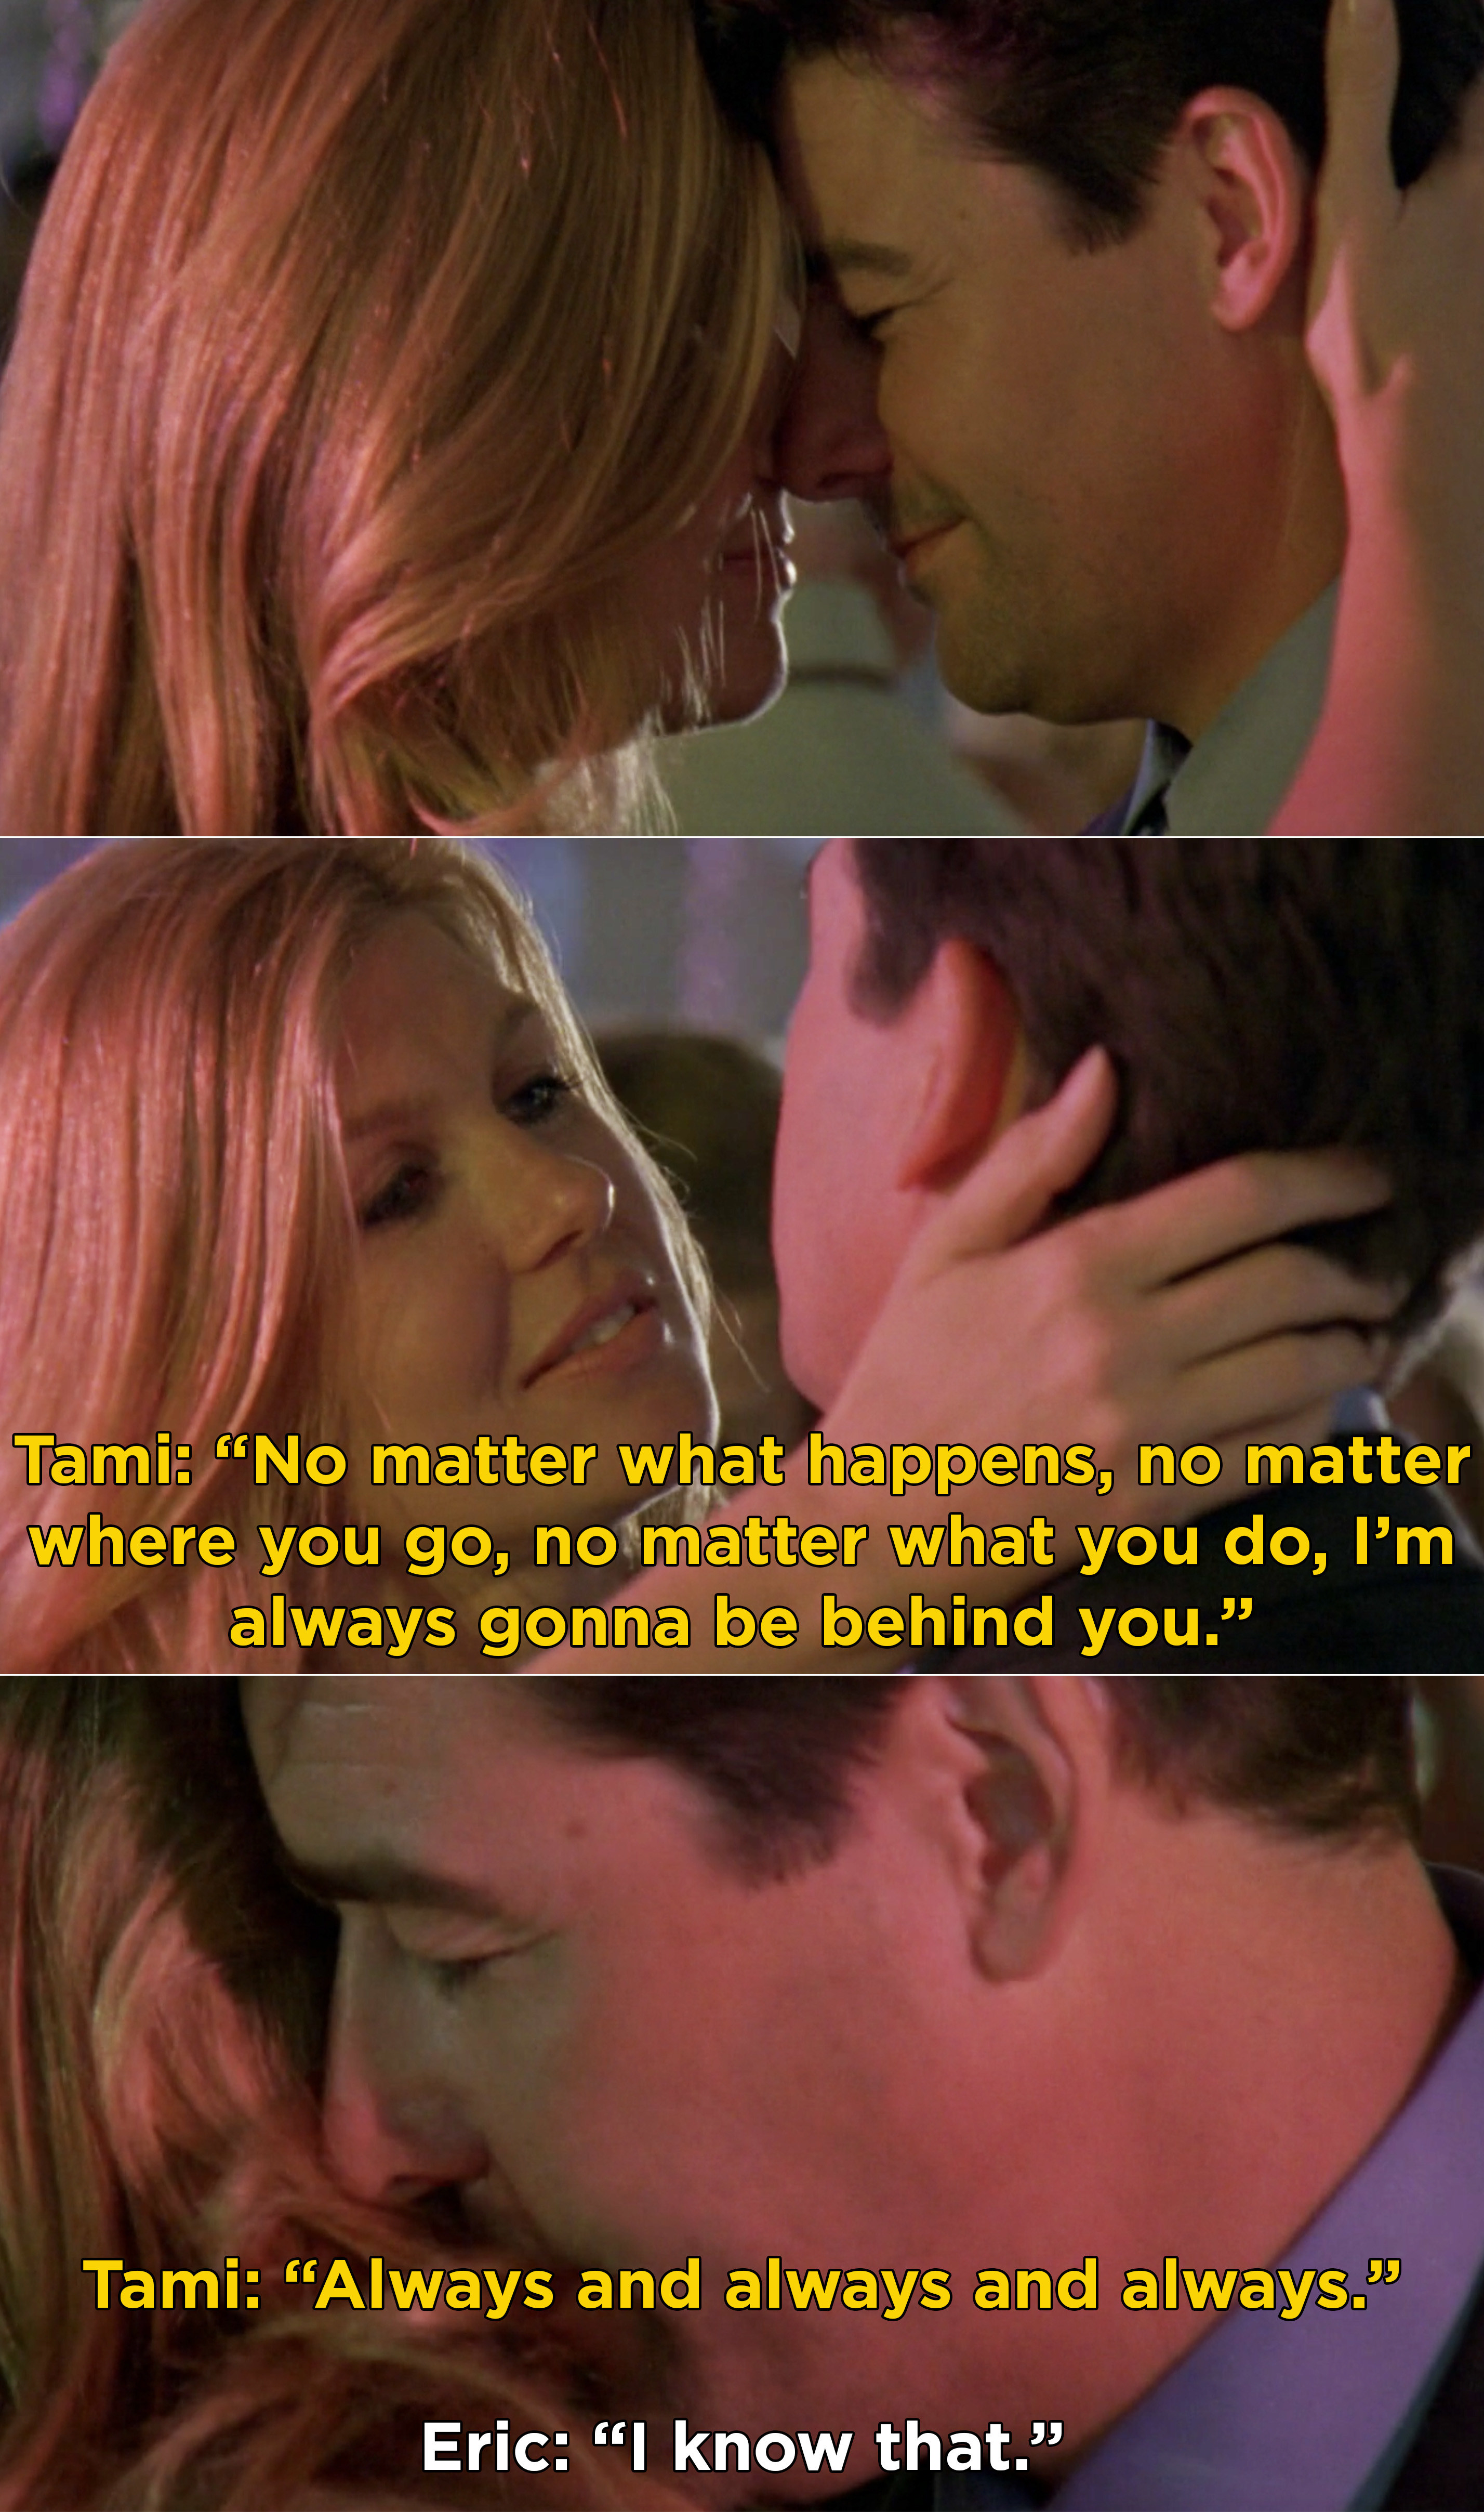 Tami telling Eric that no matter what happens, she will always be behind him